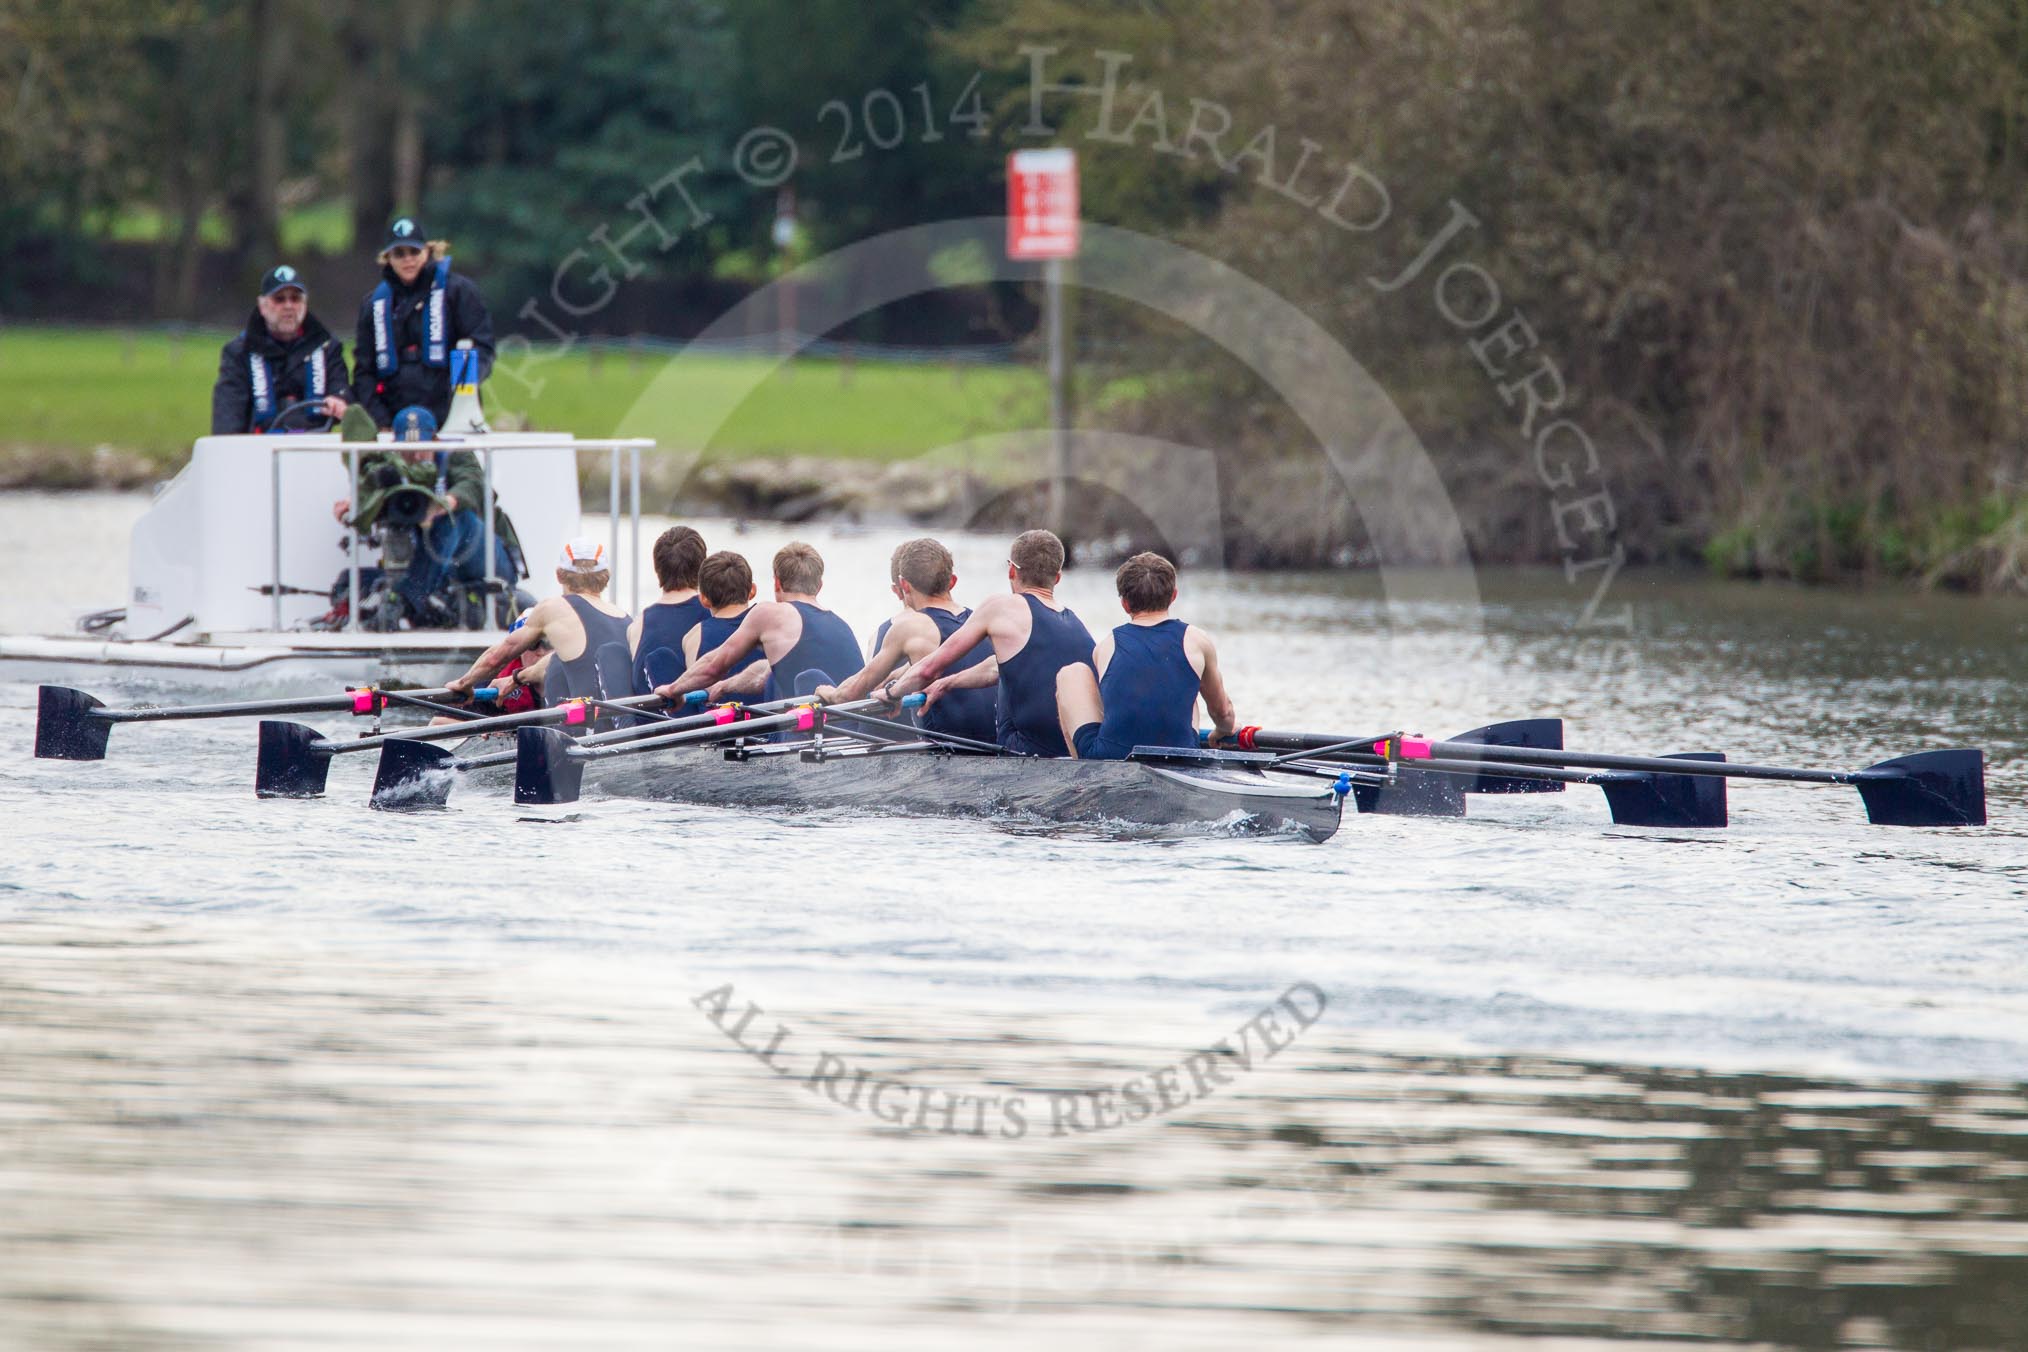 The Women's Boat Race and Henley Boat Races 2014: The Lightweight Men's Boat Race - OULRC vs CULRC, The Oxford boat is followed by the umpire's launch, with a TC cameraman in the front..
River Thames,
Henley-on-Thames,
Buckinghamshire,
United Kingdom,
on 30 March 2014 at 15:40, image #371